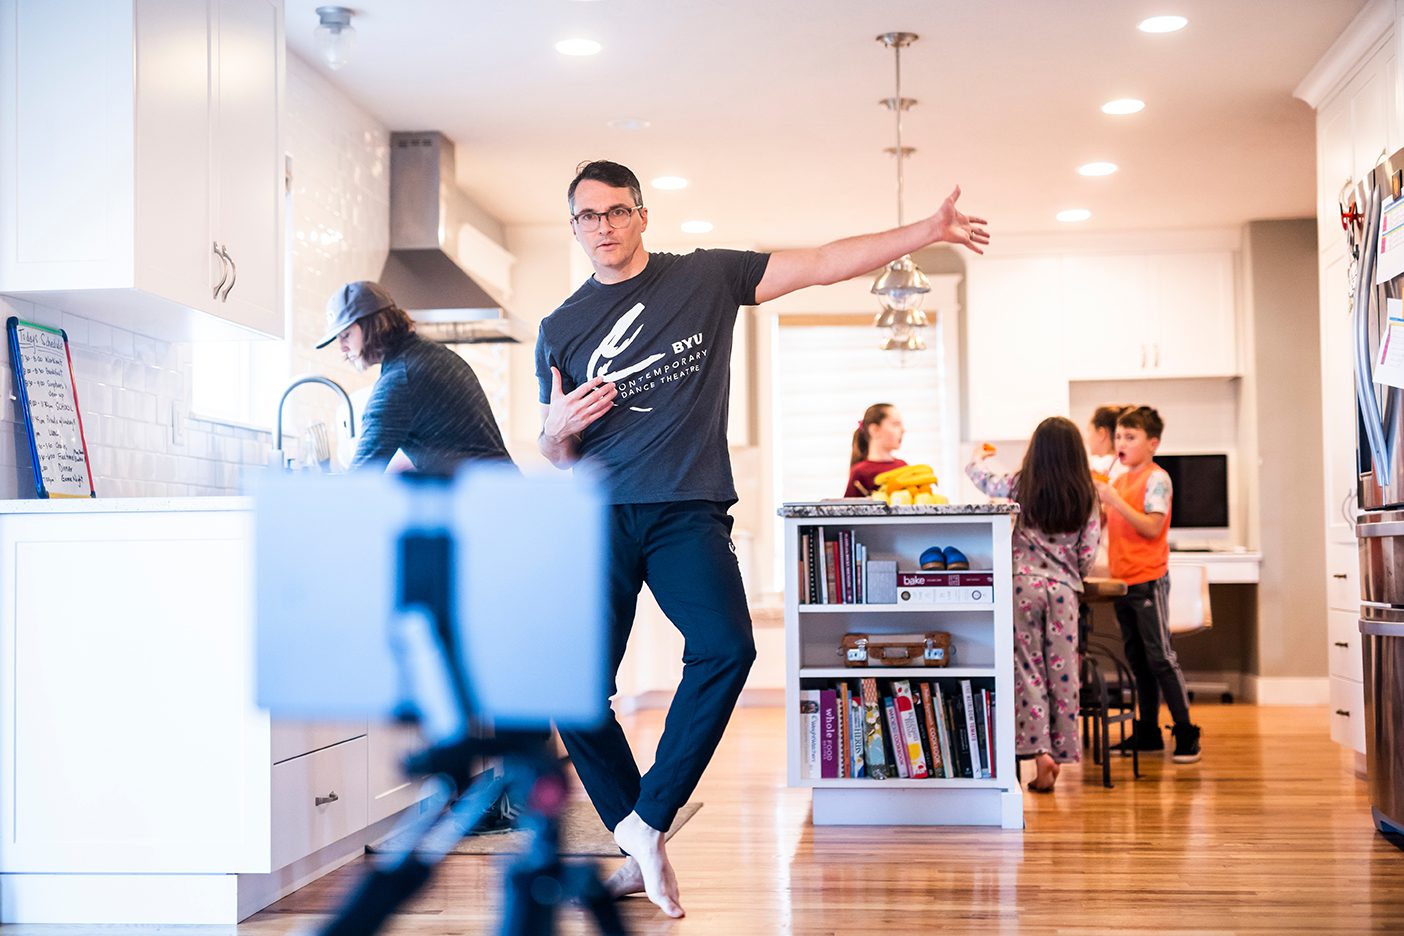 Dance professor Nathan Balser dances in front of a camera in his kitchen with his kids behind him.